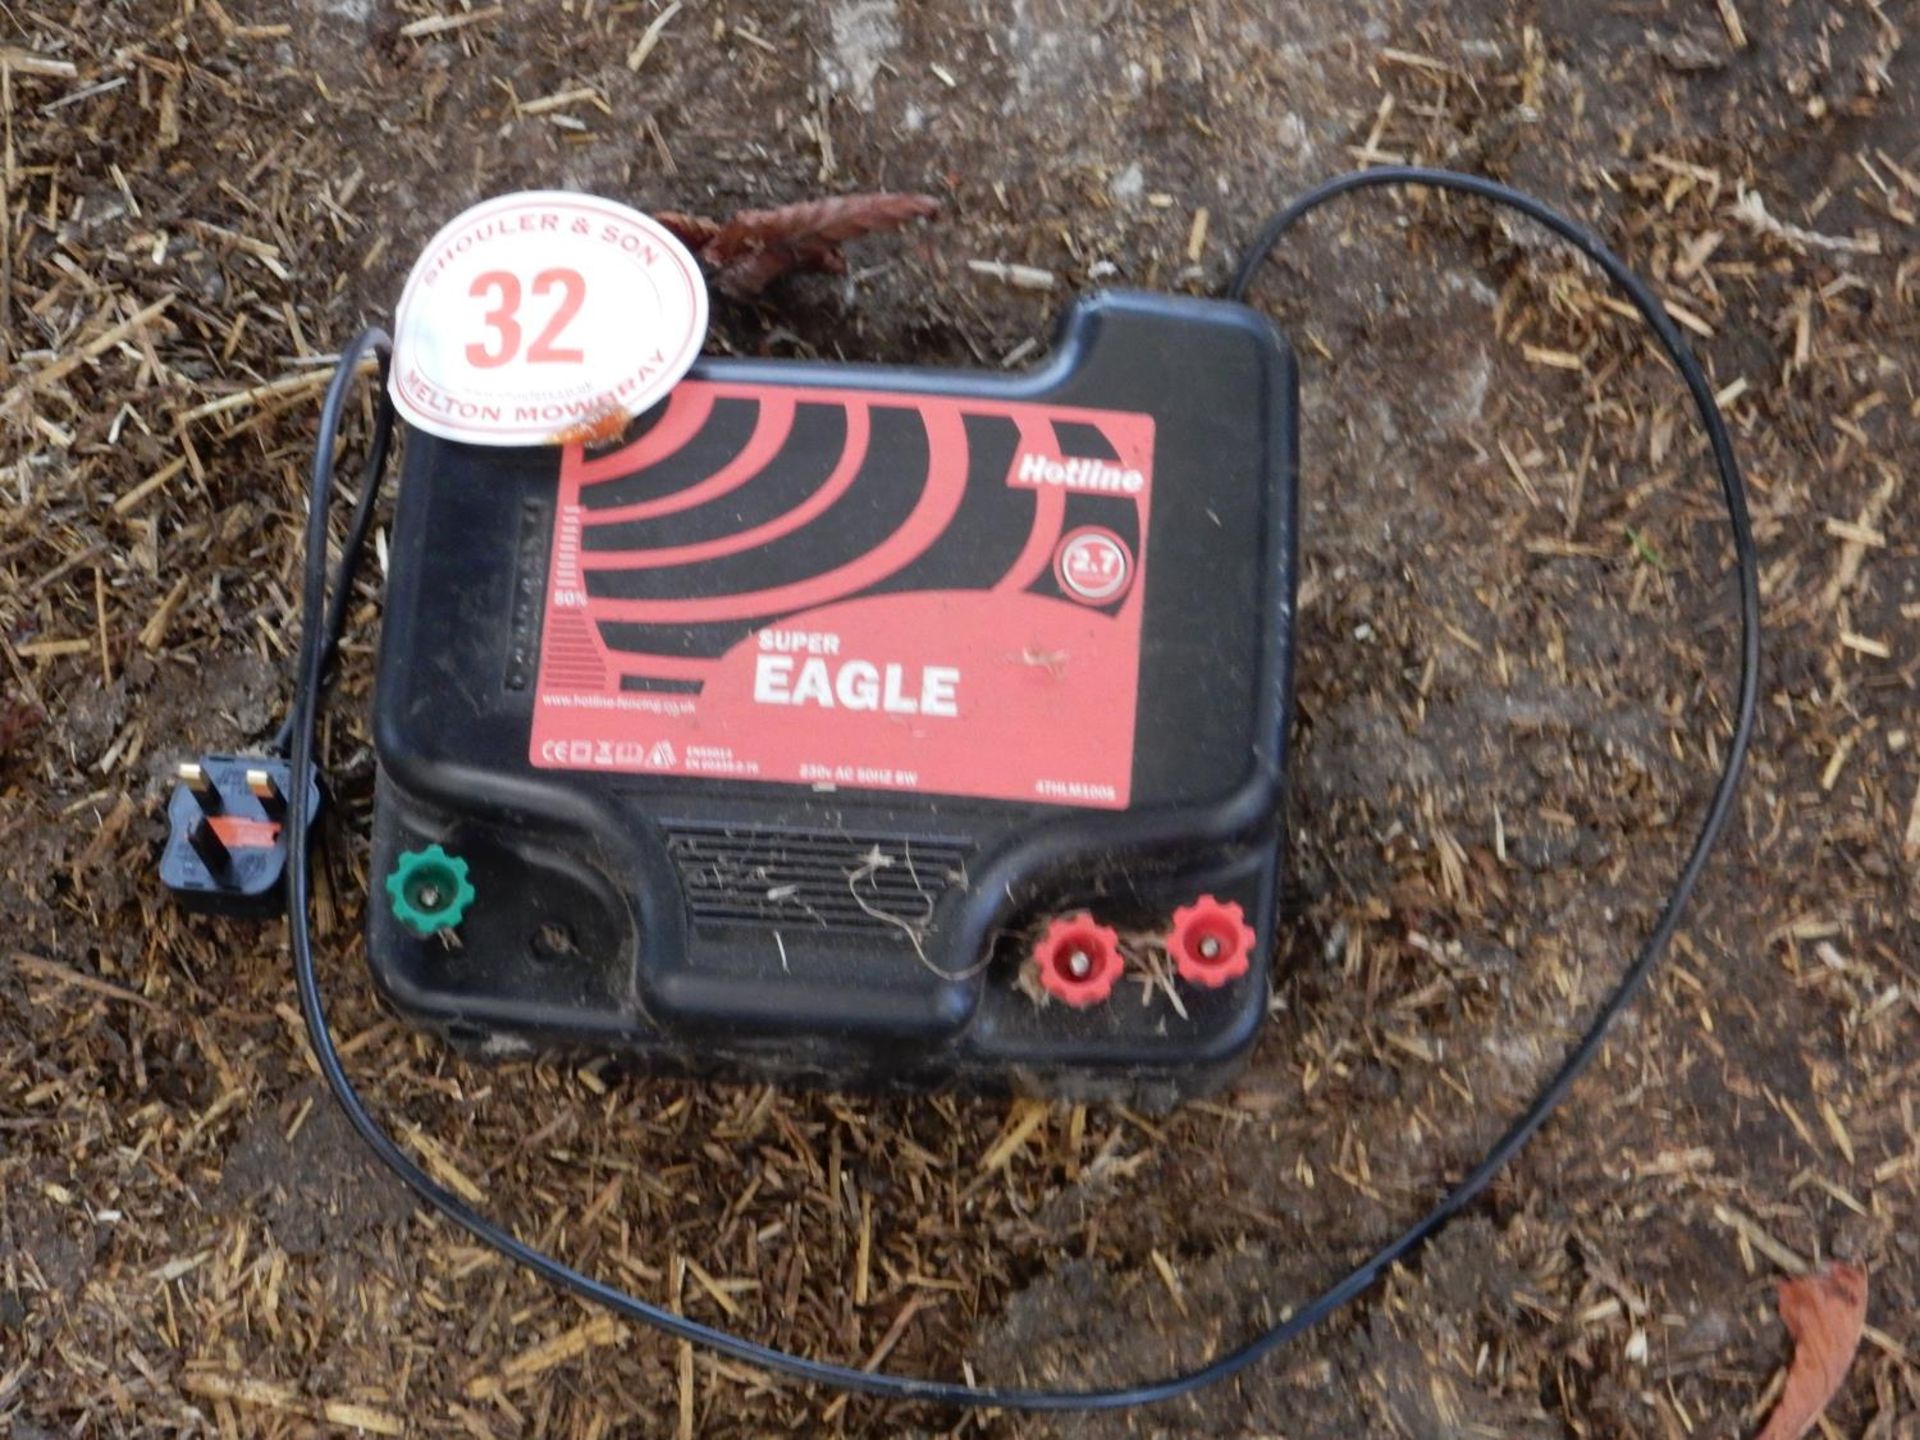 Mains operated Hotline Super Eagle electric fencing unit